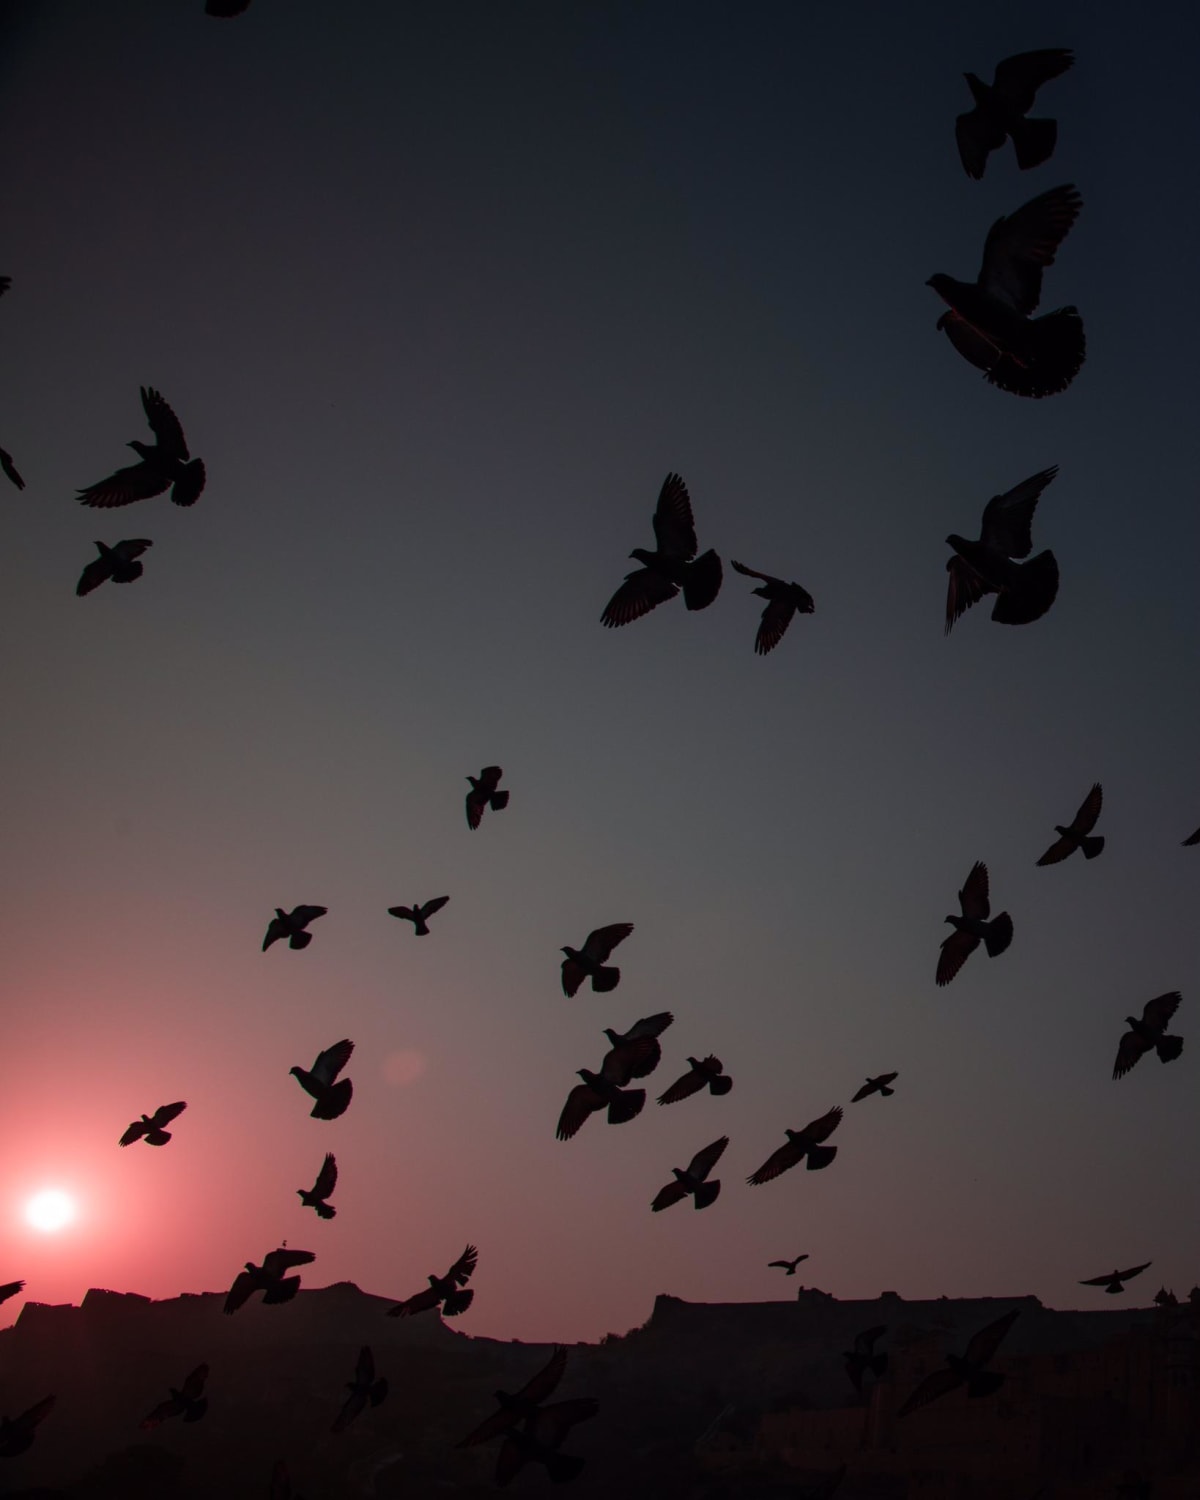 Doves in the sunset over Amer Fort, Jaipur, India (It could be anywhere though).